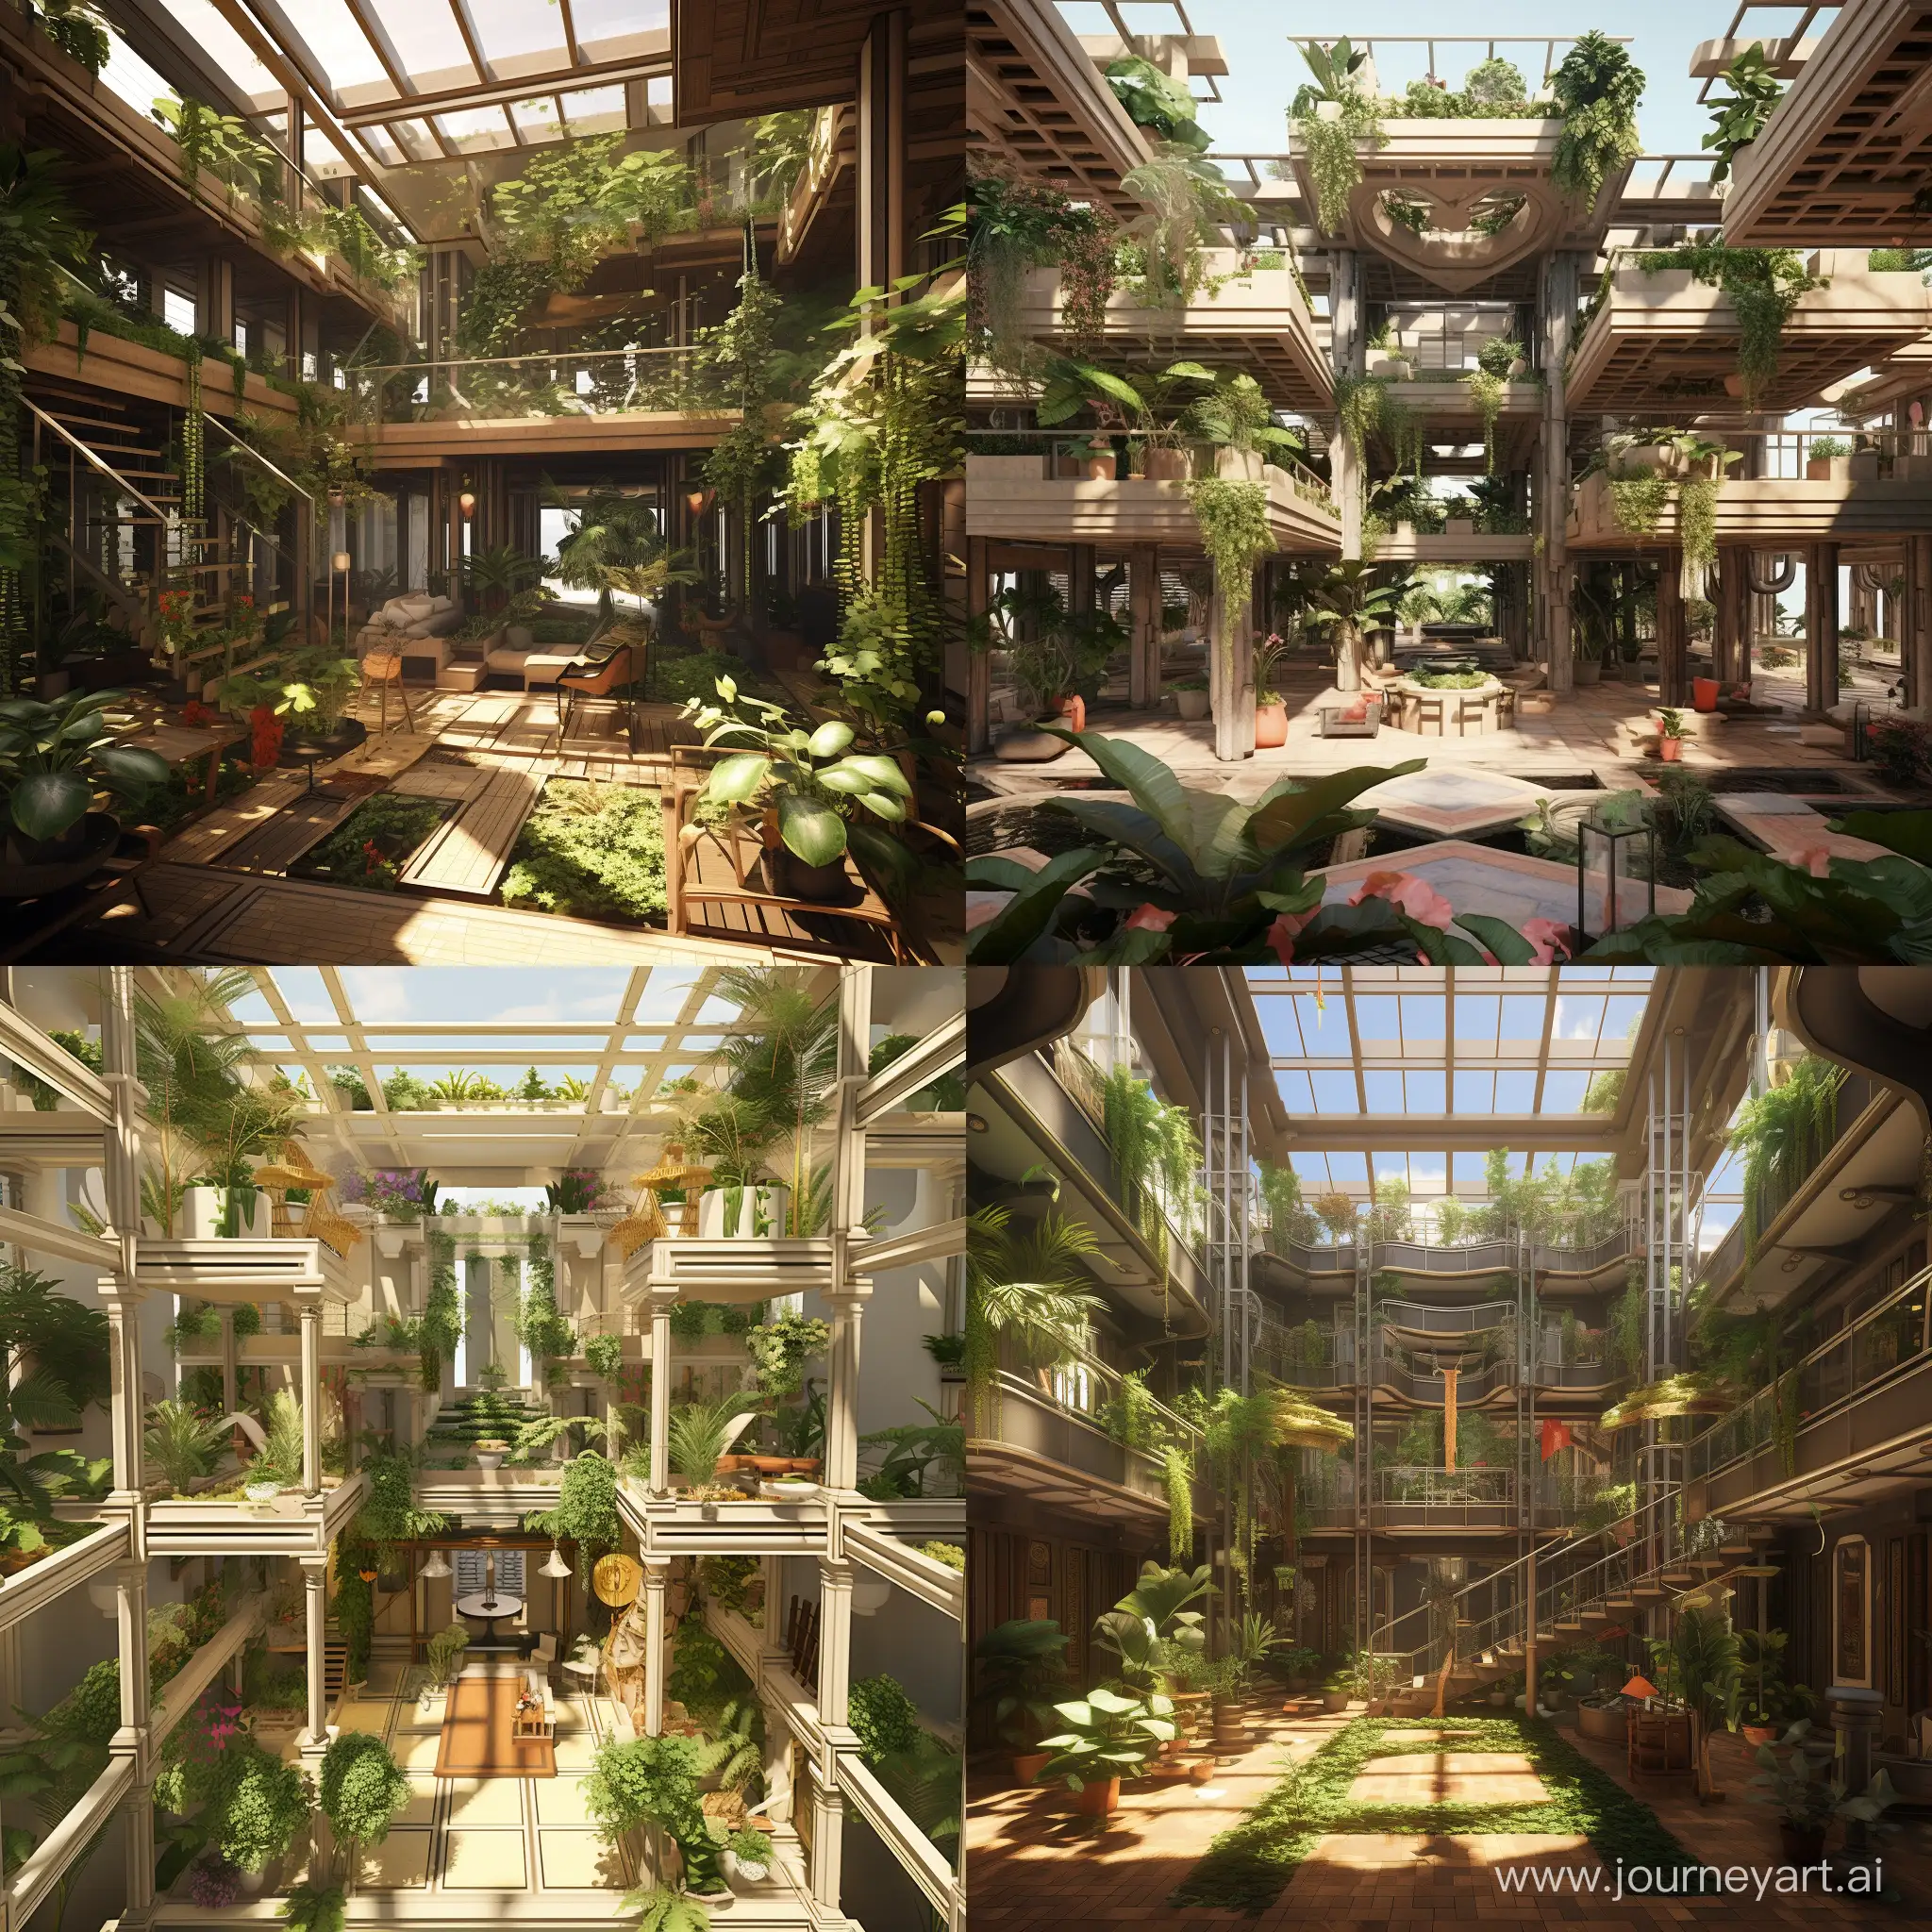 make a 4-floor small building with beams and columns with an atrium open to the sky the atrium is connected with the outside , and atrium consists of lots of plants with unique designs with different level slabs coming out of each floor with plants vertical and horizontal placed 